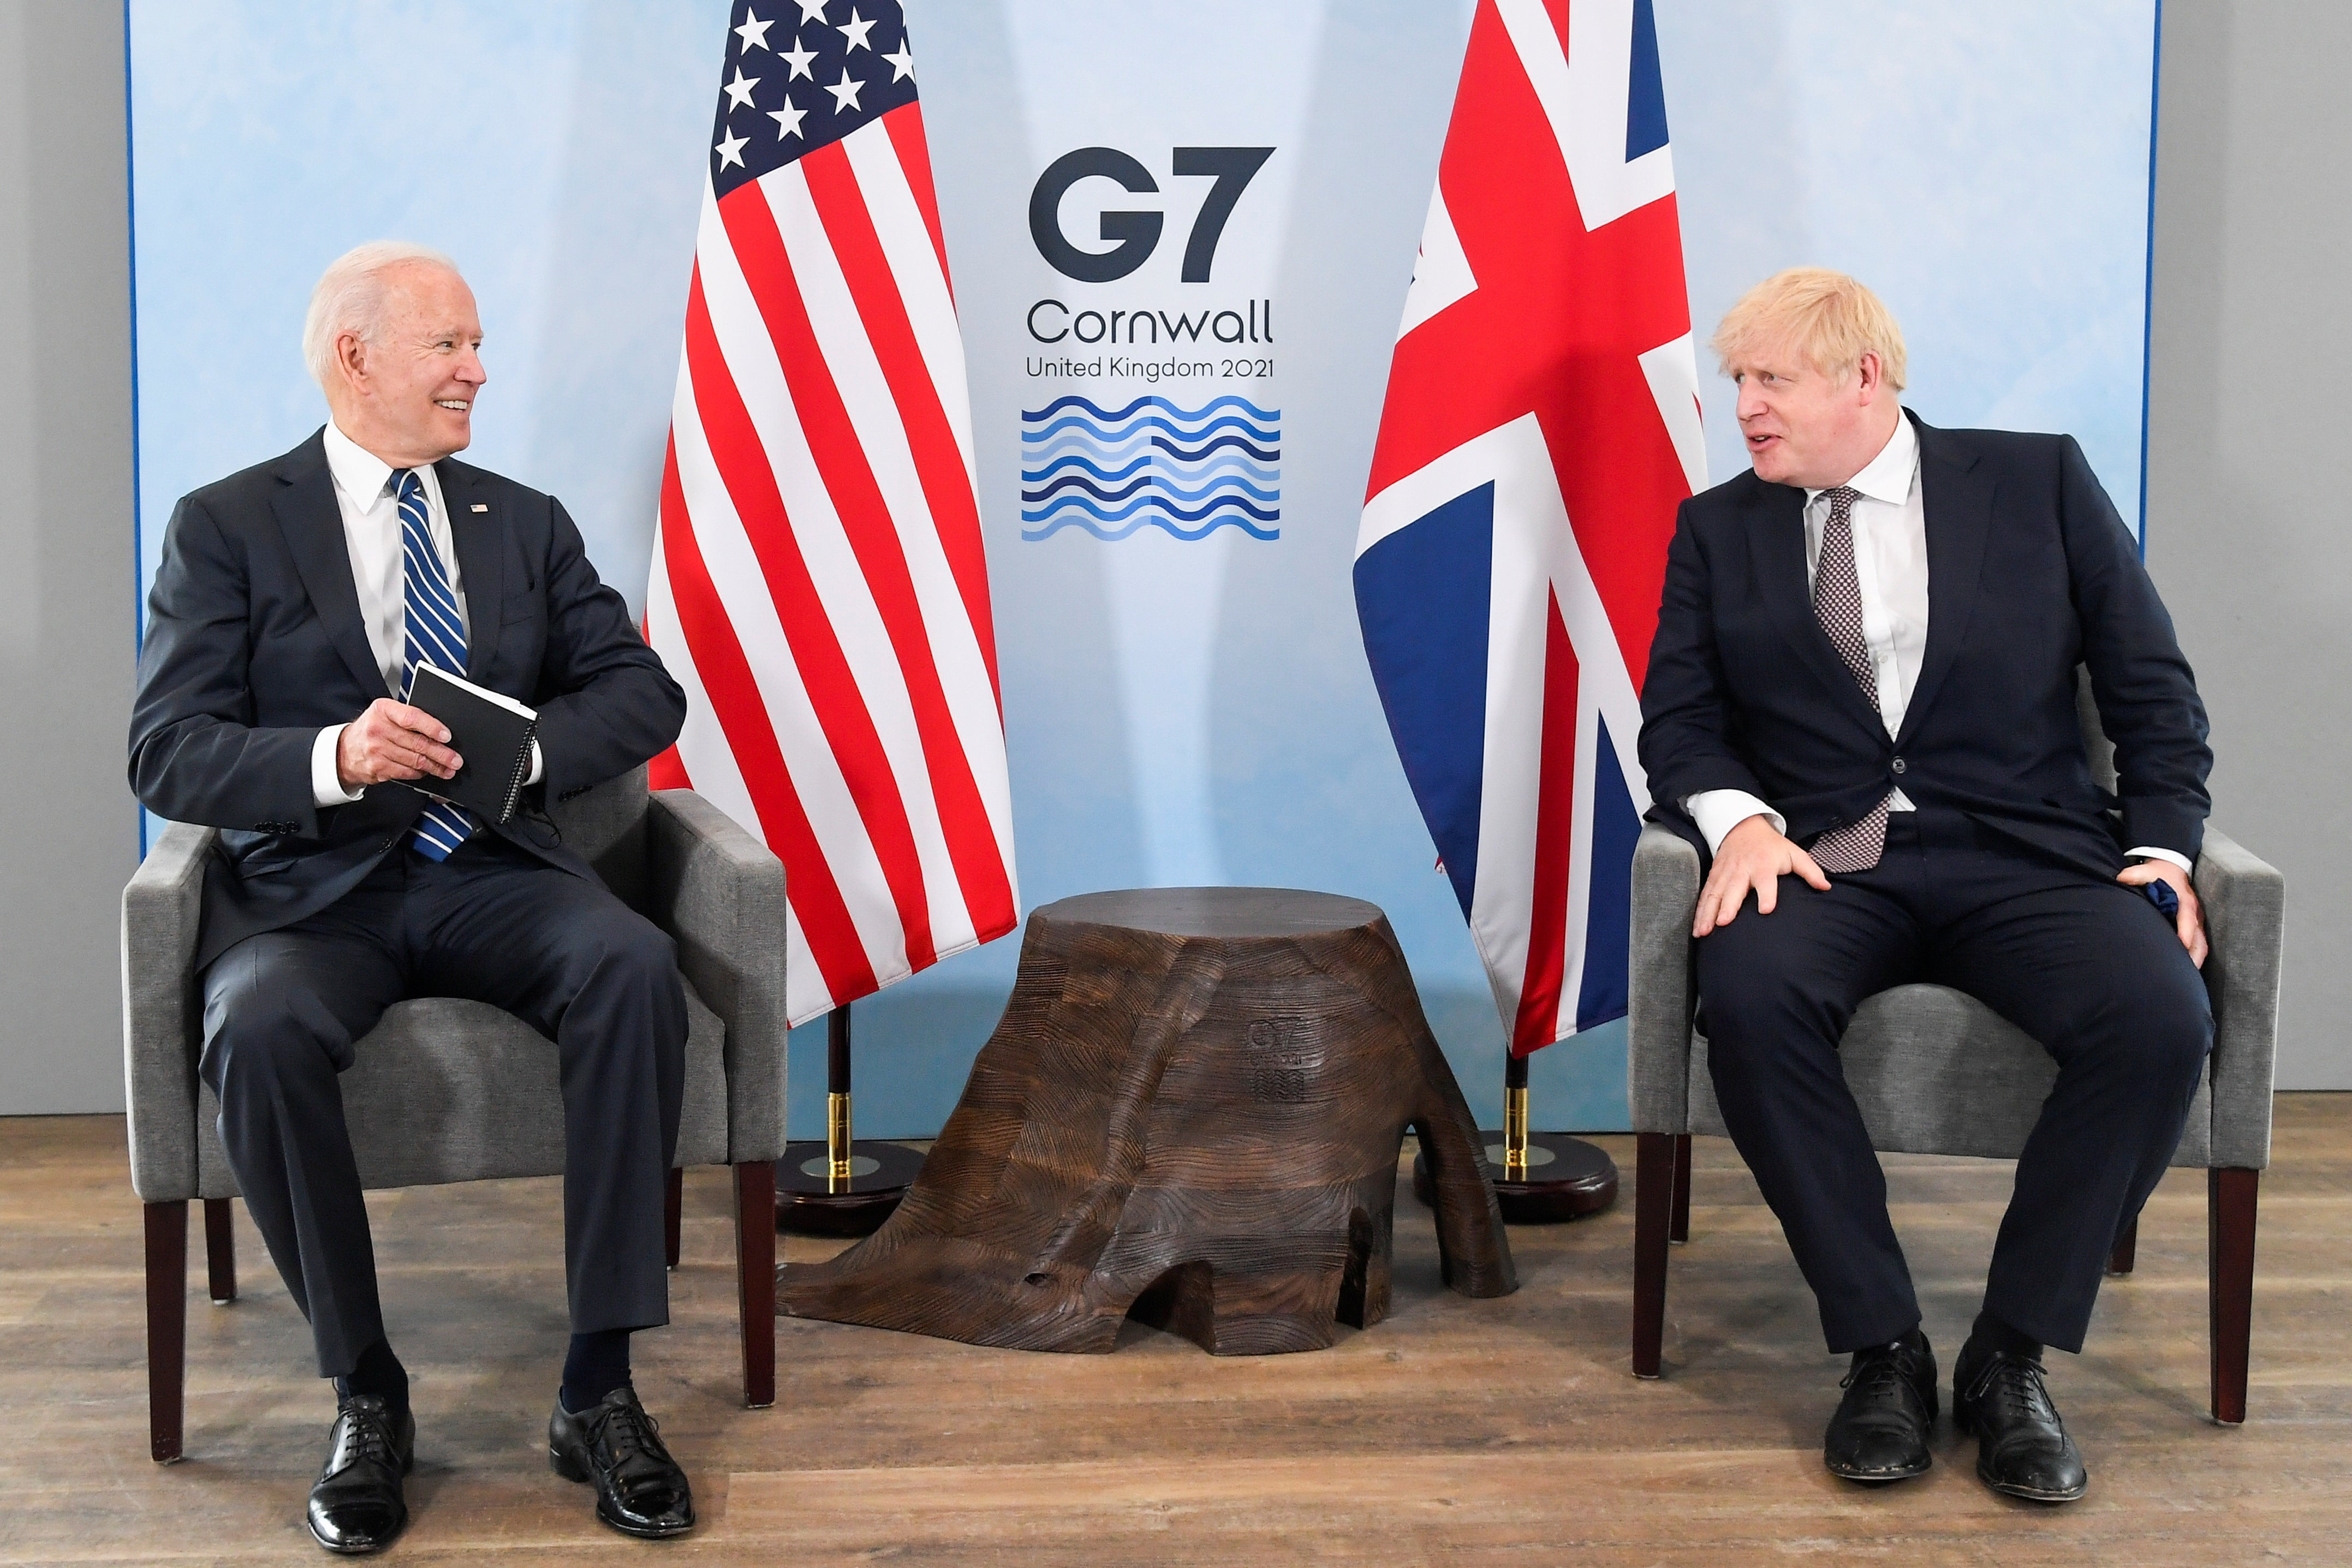 Boris Johnson is expected to join Joe Biden and other G7 leaders in crisis talks (Toby Melville/PA)